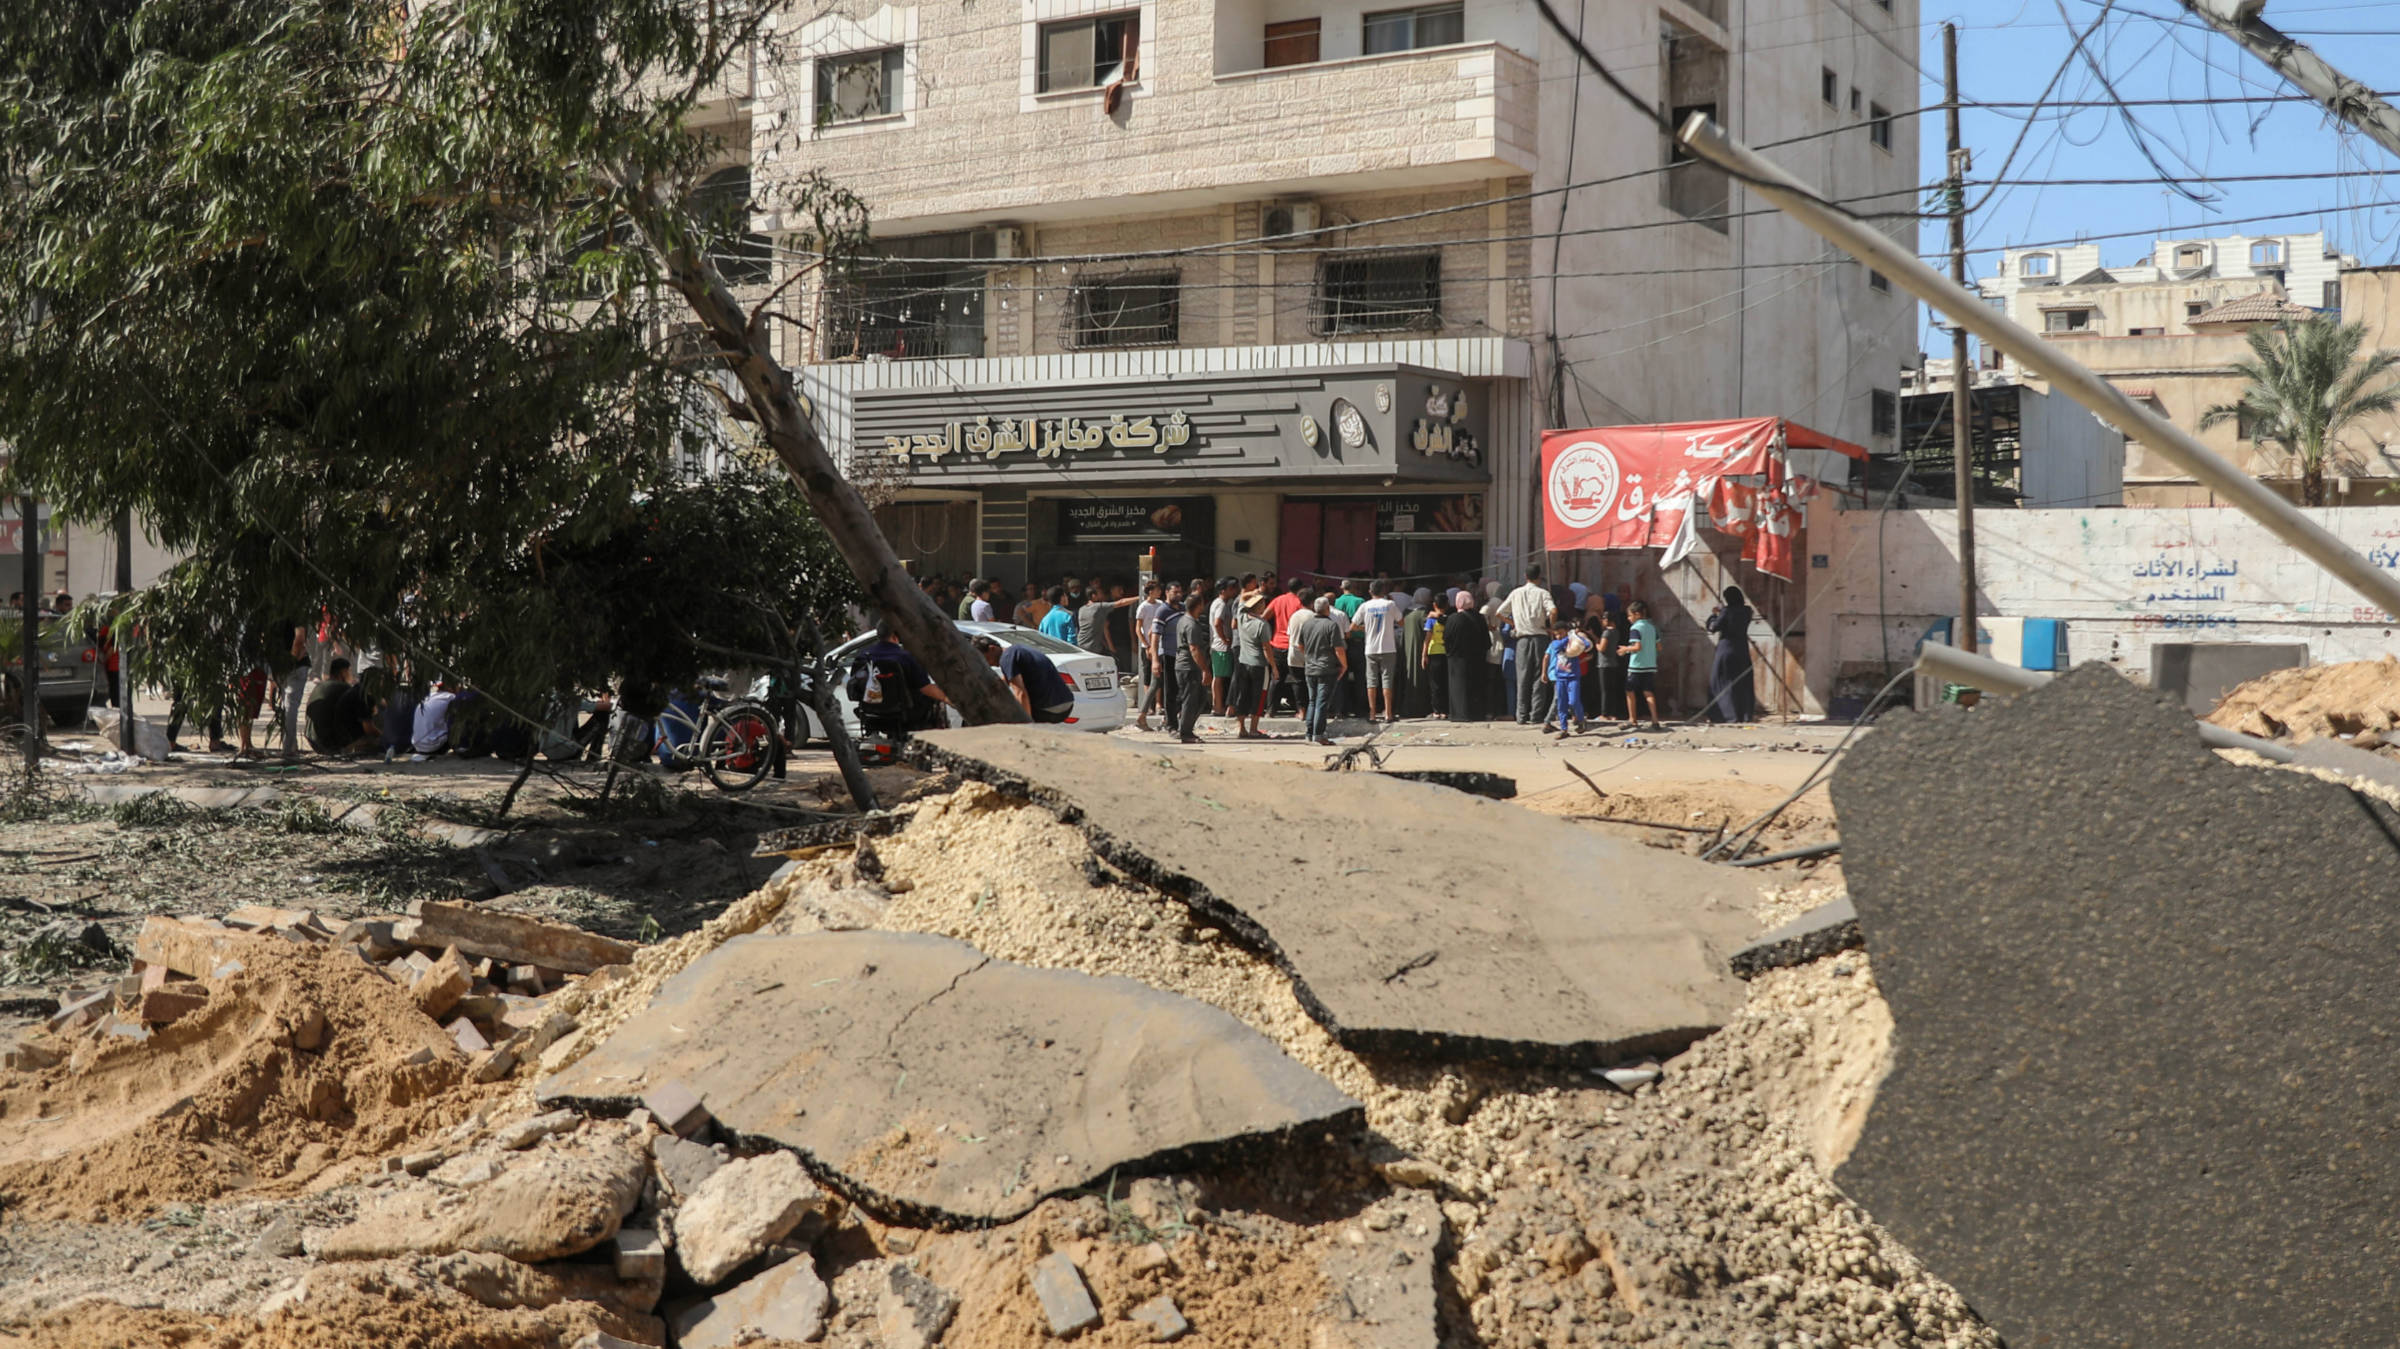 An Israeli strike hit the street in front of a bakery where moments earlier tens of people were queuing for bread, al-Jalaa street, Gaza (MEE/Mohammed al-Hajjar)